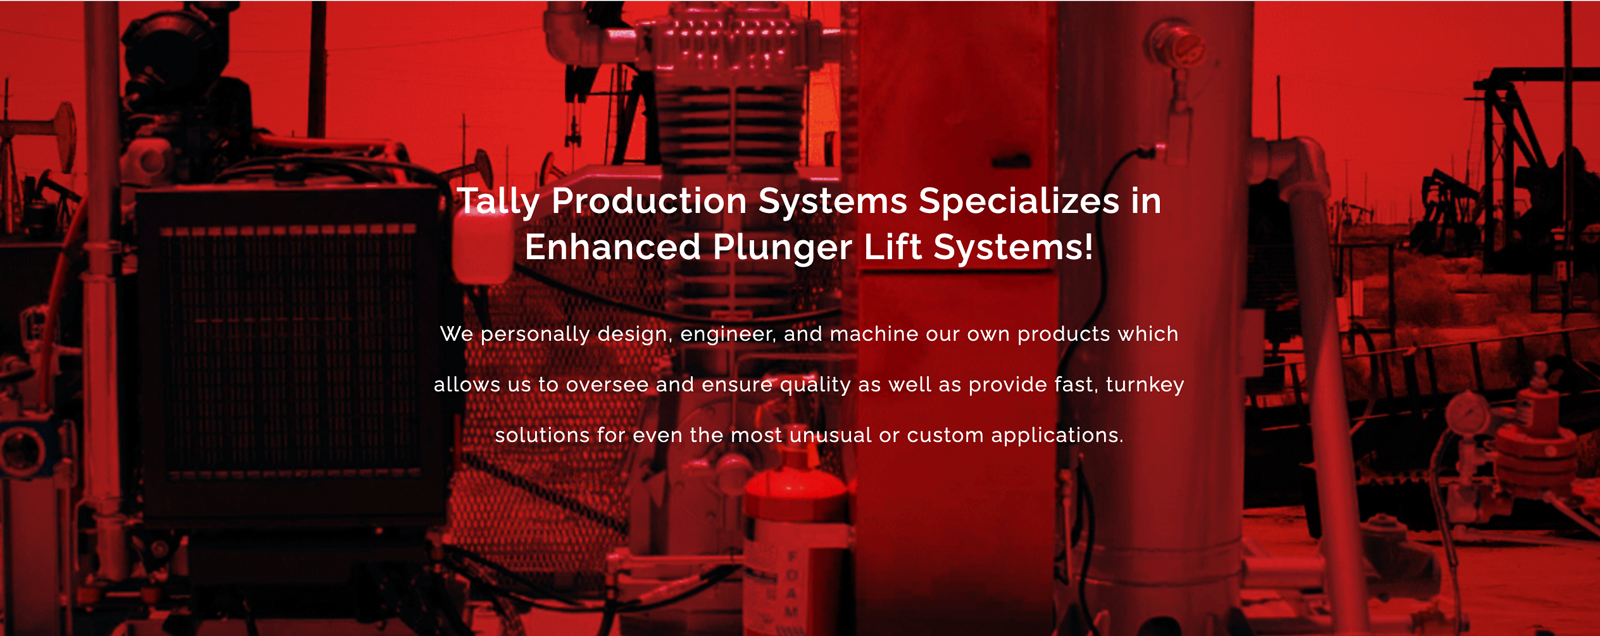 Tally Production Systems Specializes in Enhanced plunger lift systems!